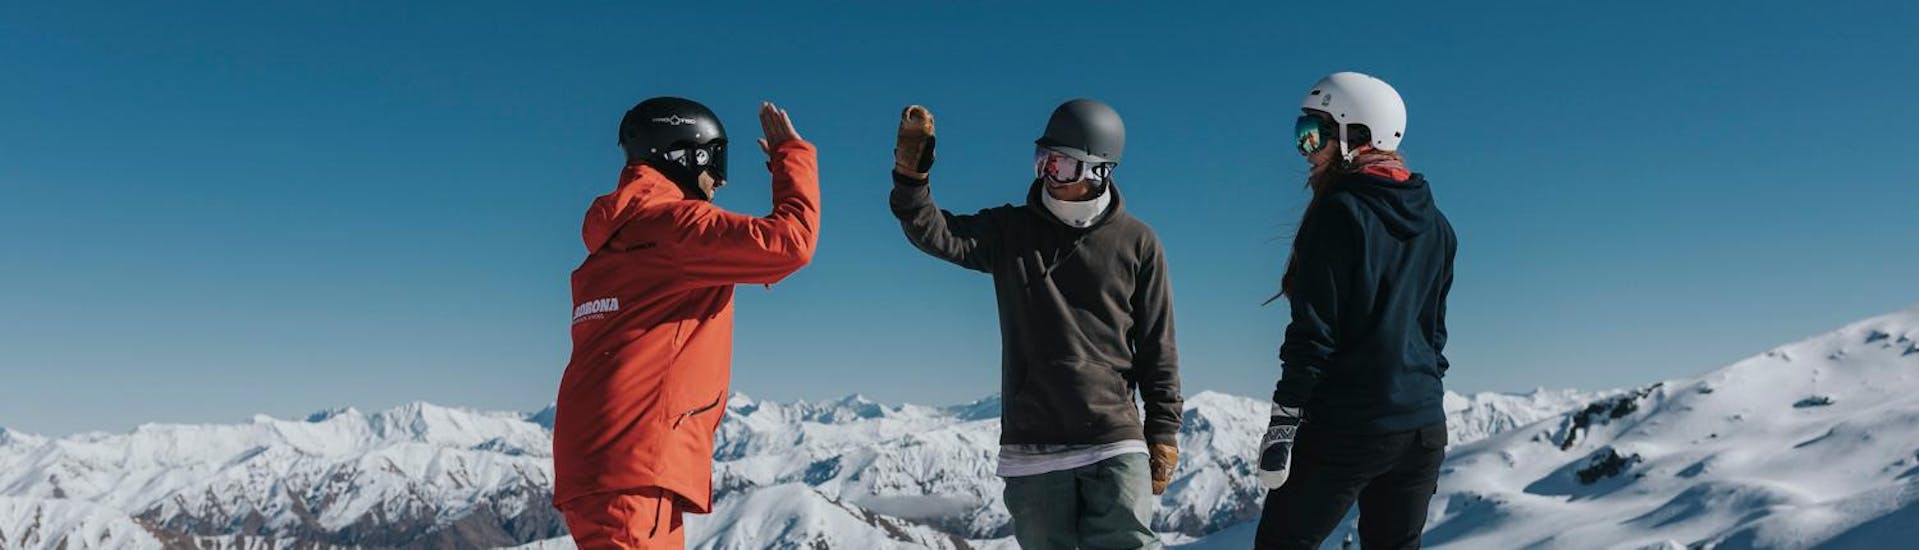 Snowboarding Lessons for Adults - All Levels.